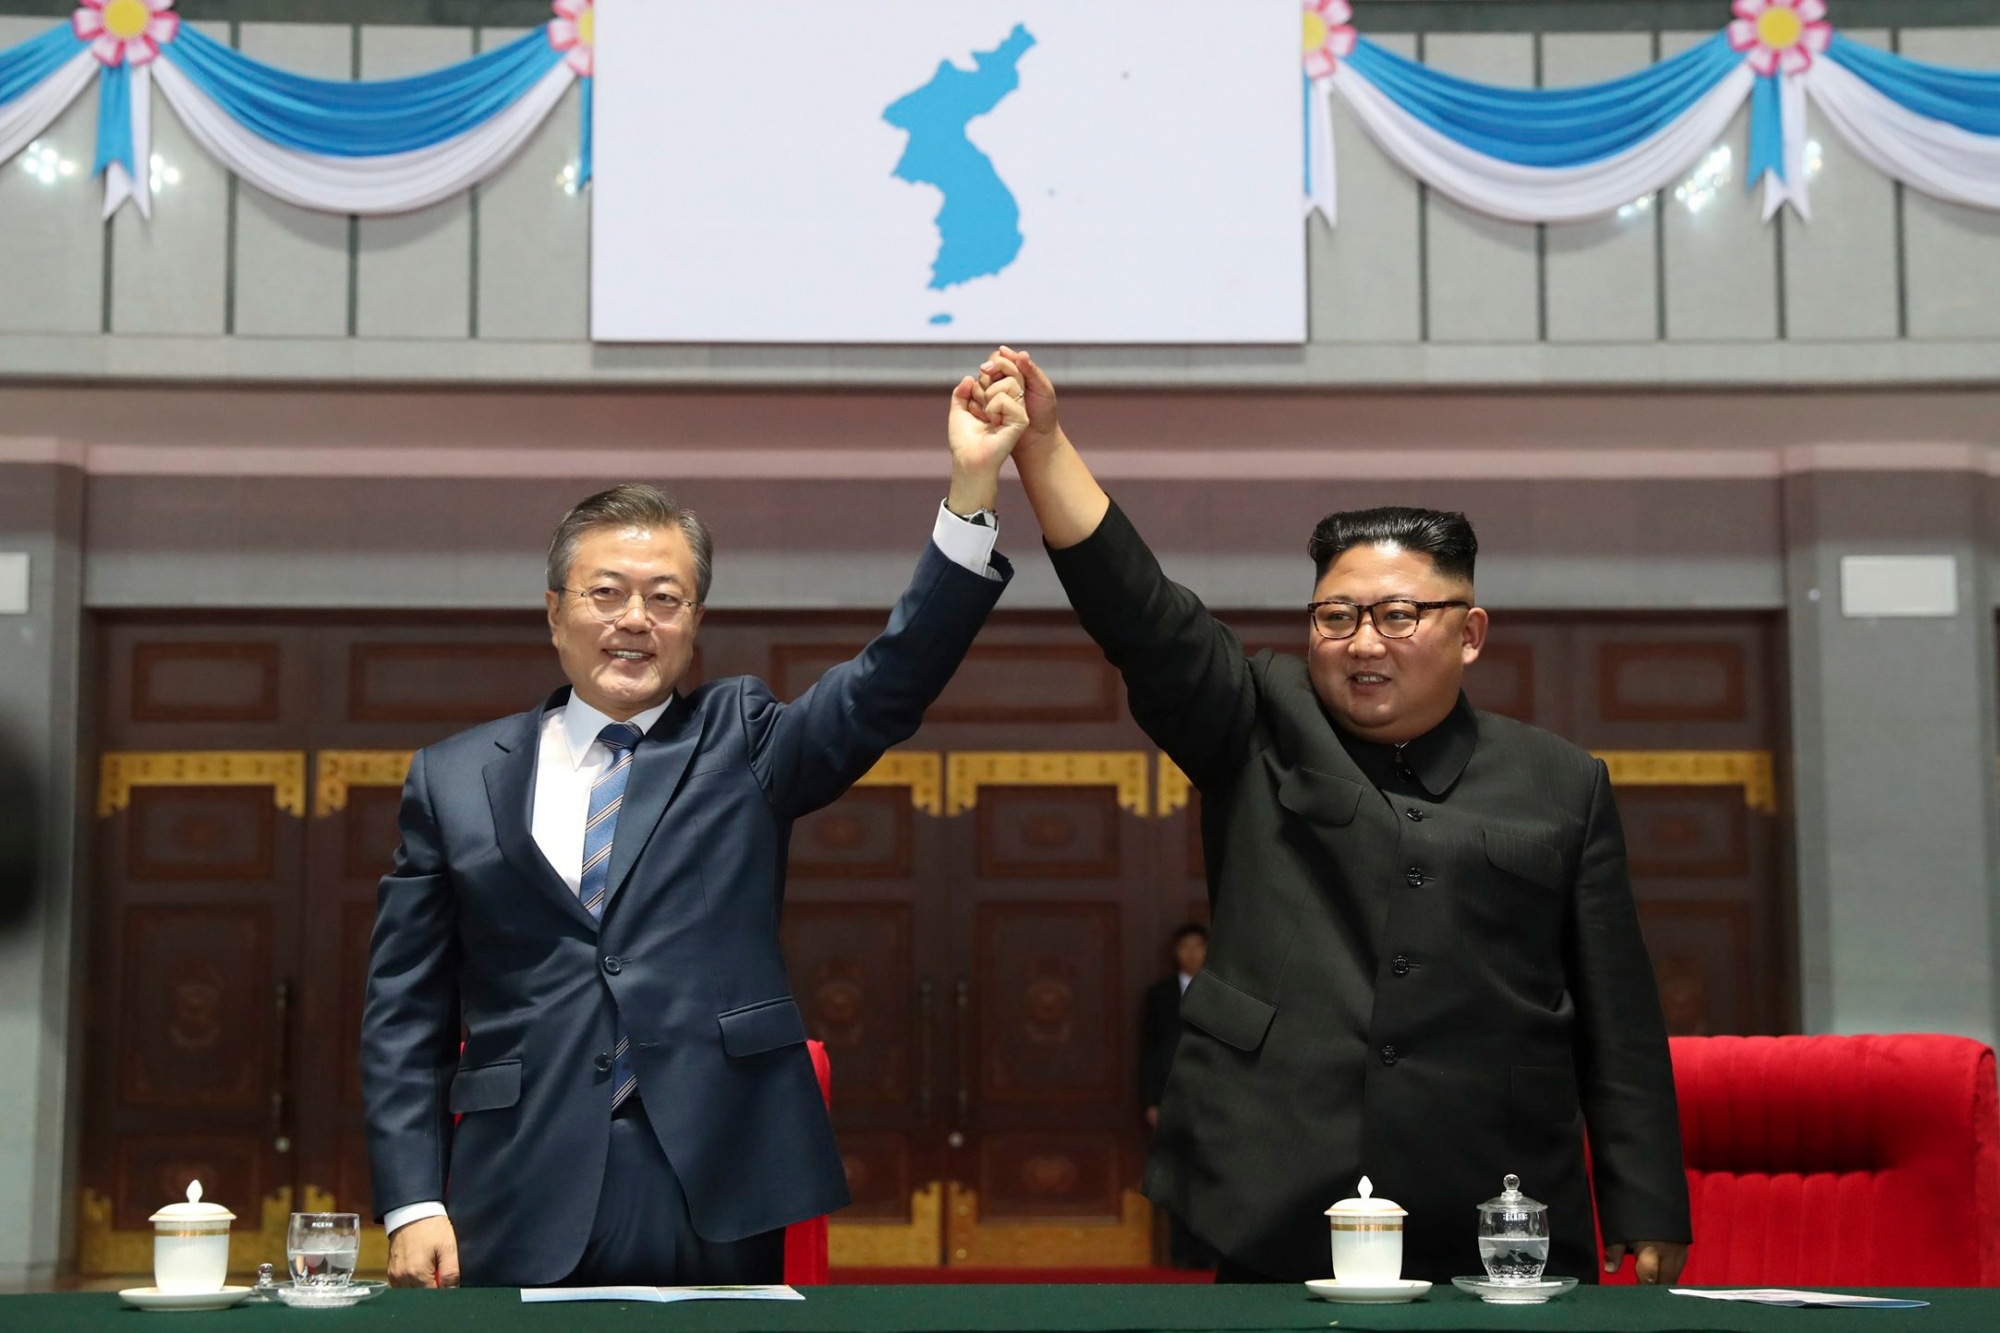 South Korean President Moon Jae-in and North Korean leader Kim Jong Un raise their hands after watching the mass games performance of "The Glorious Country" at May Day Stadium in Pyongyang, North Korea, Wednesday, Sept. 19, 2018. (Pyongyang Press Corps Pool via AP) North Korea Koreas Summit